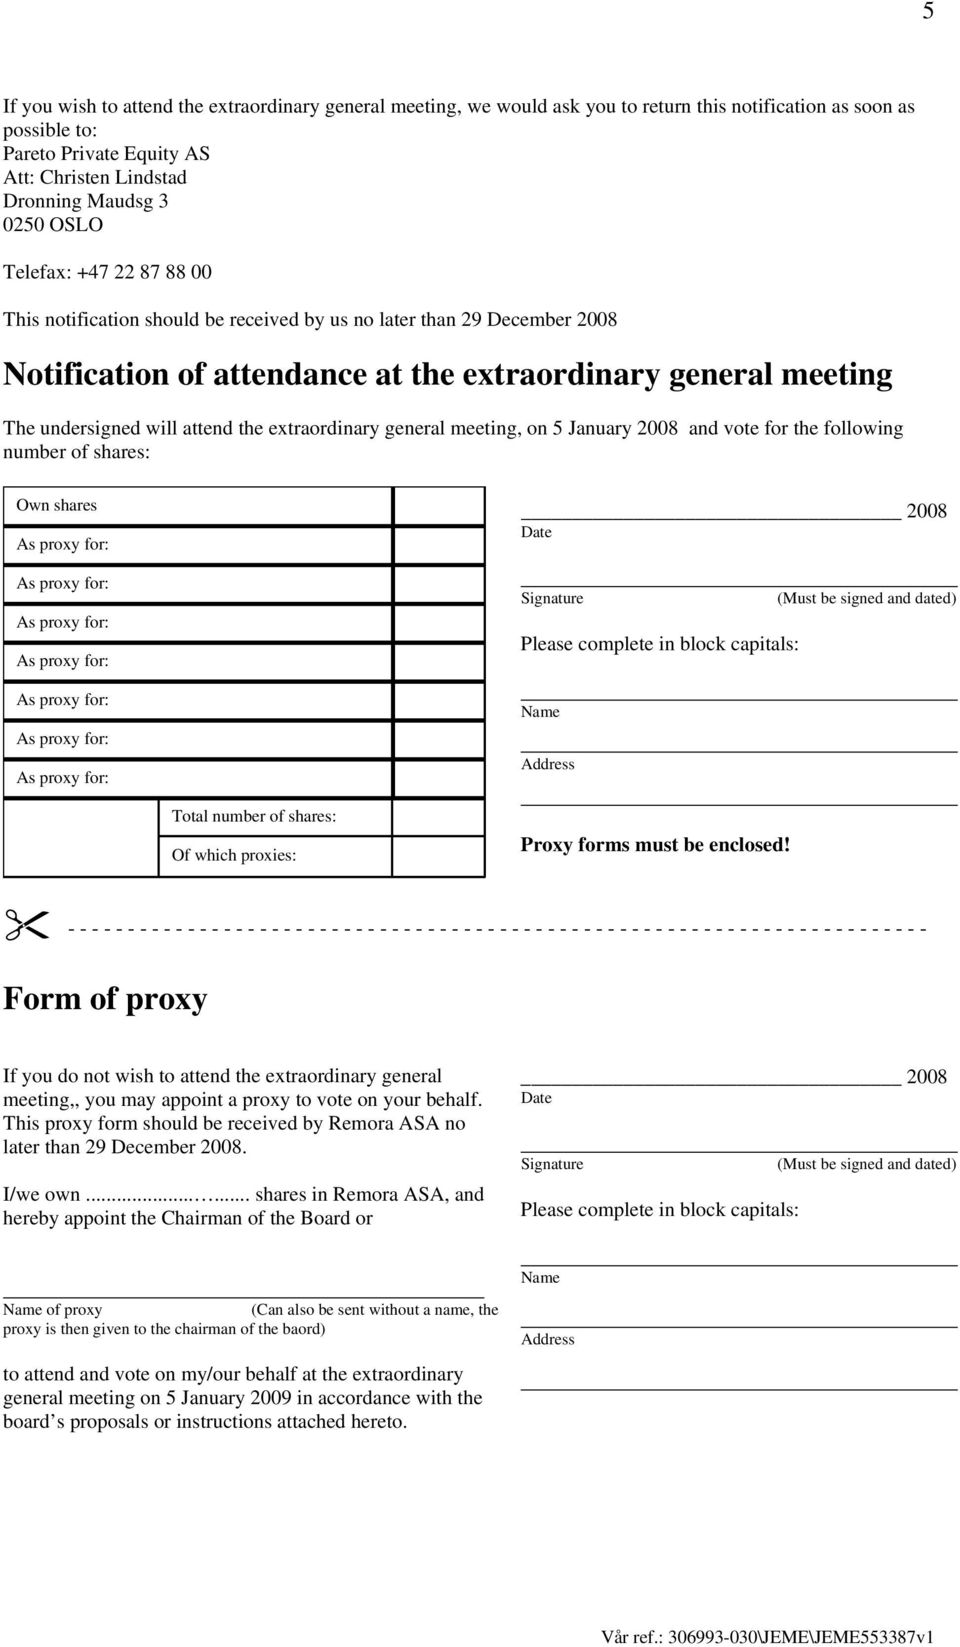 extraordinary general meeting, on 5 January 2008 and vote for the following number of shares: Own shares 2008 Date Signature Please complete in block capitals: Name Address (Must be signed and dated)